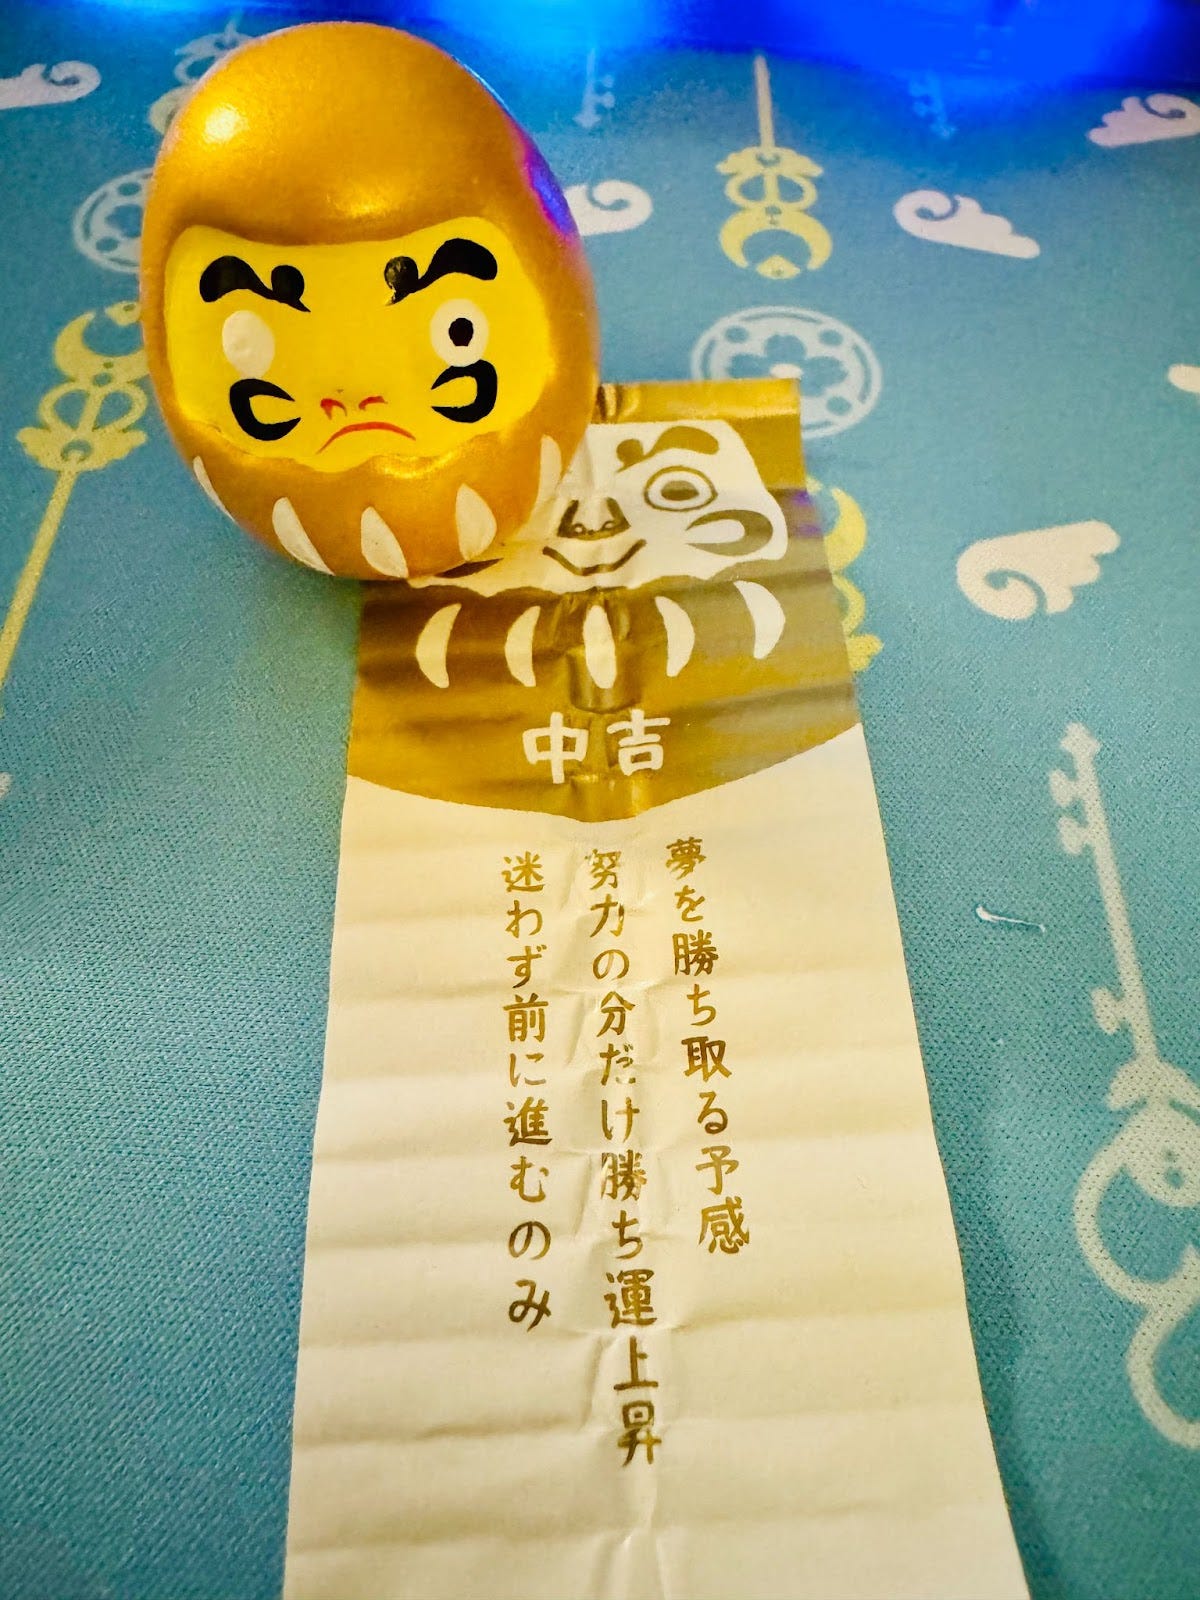 A golden Daruma doll (a Japanese symbol for perseverence and good luck) with its left eye painted, and a fortune underneath reading "middle blessing".